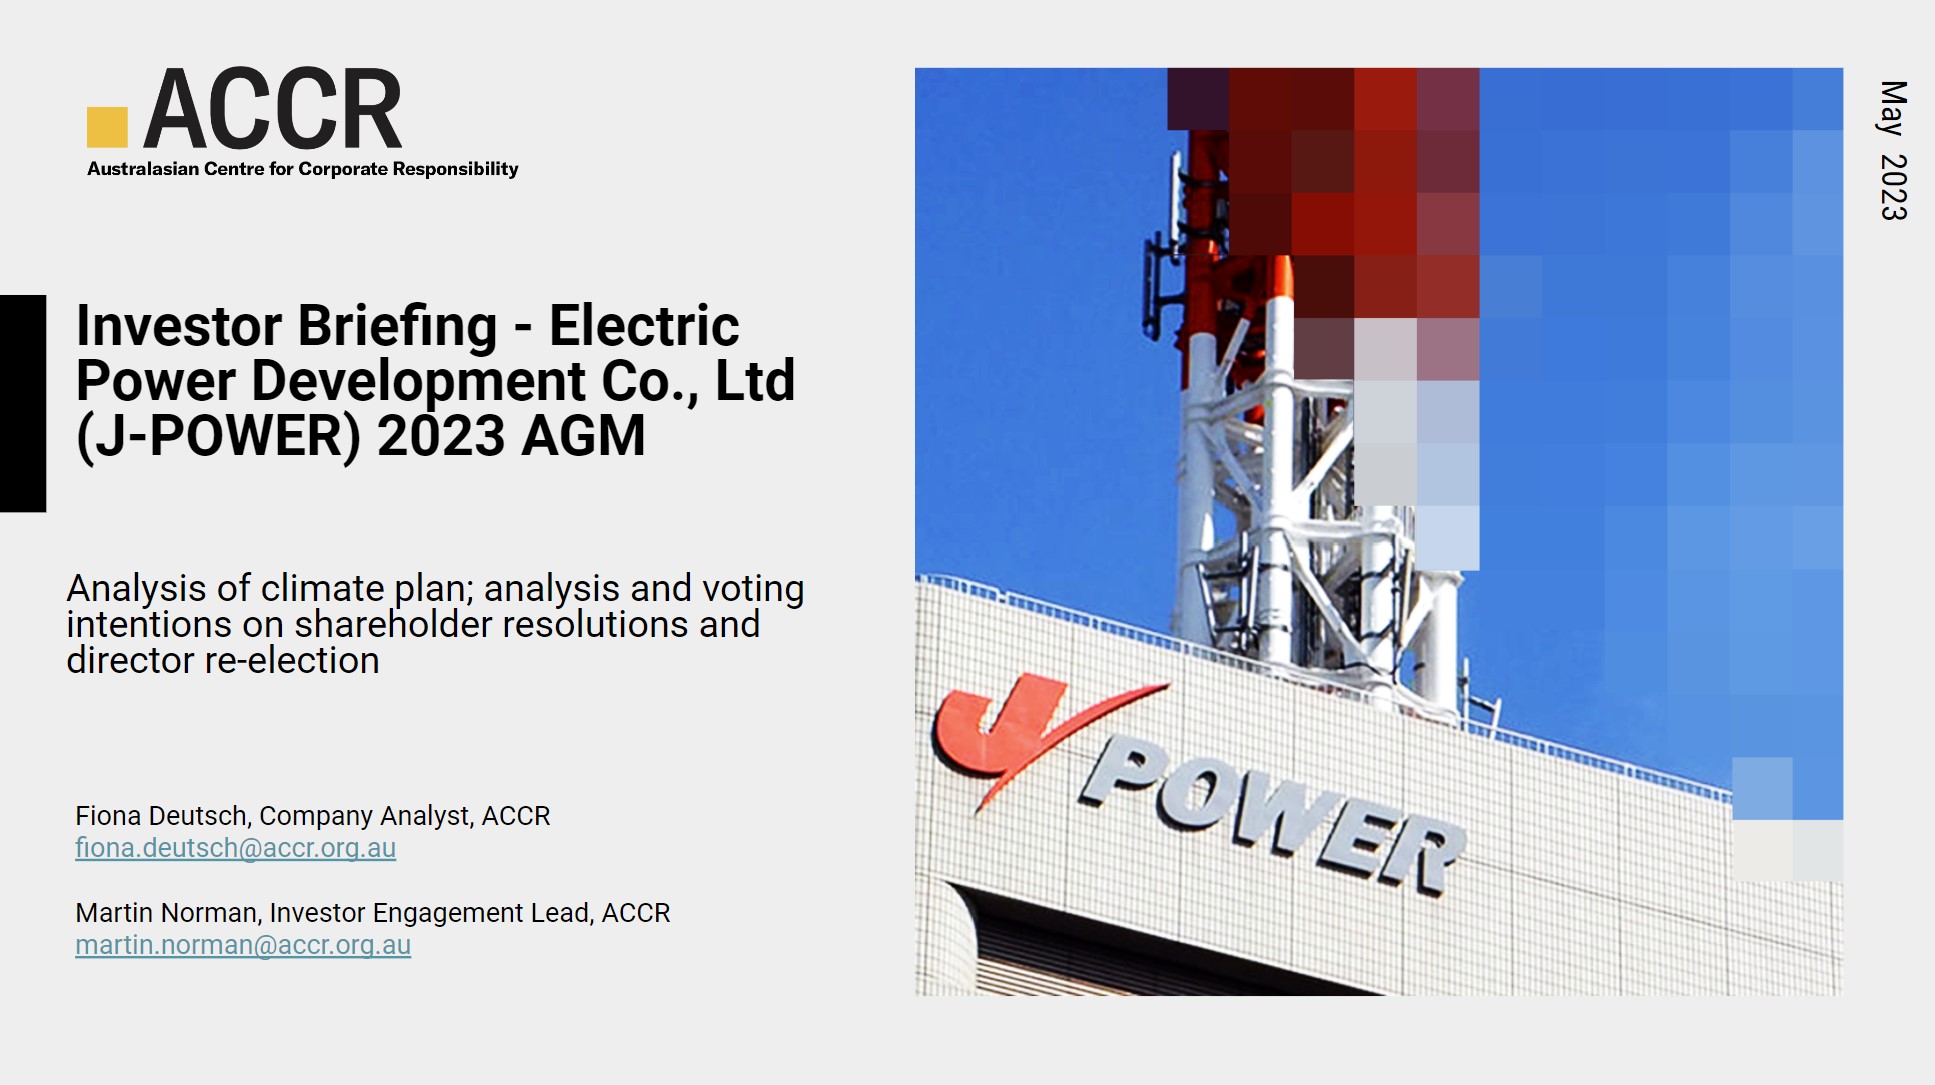 Cover page of the Investor Briefing - Electric Power Development Co., Ltd (J-POWER) 2023 AGM publication.